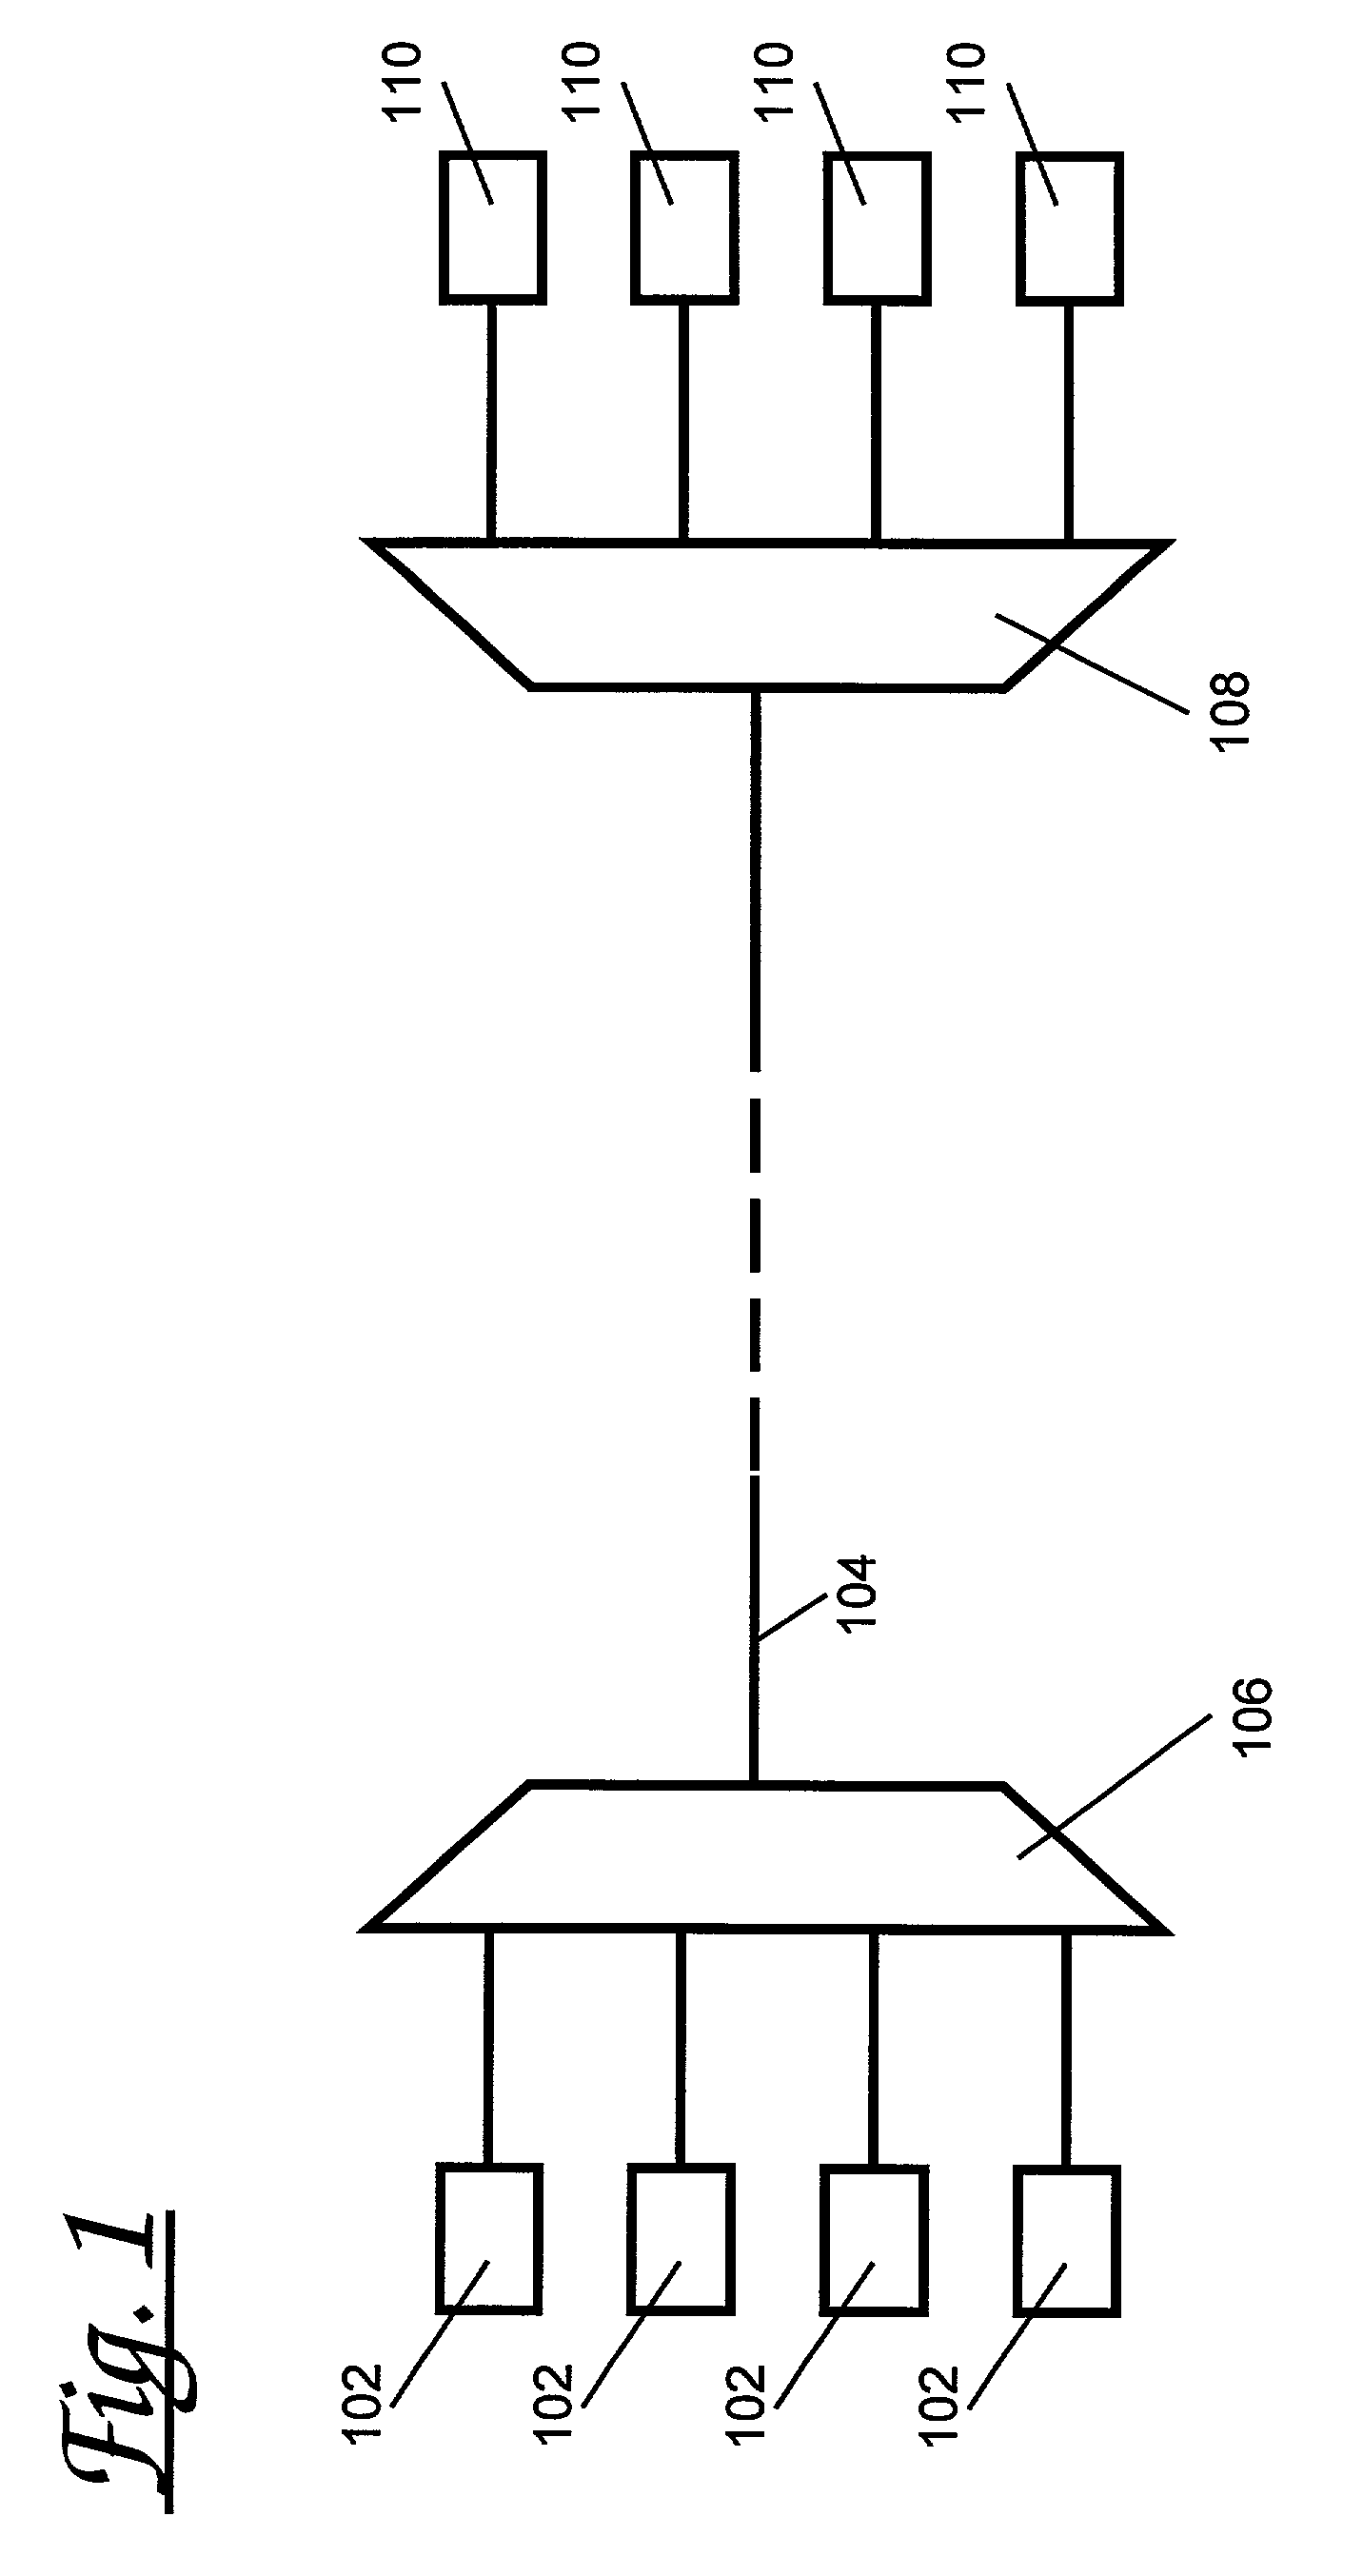 Optical grating device